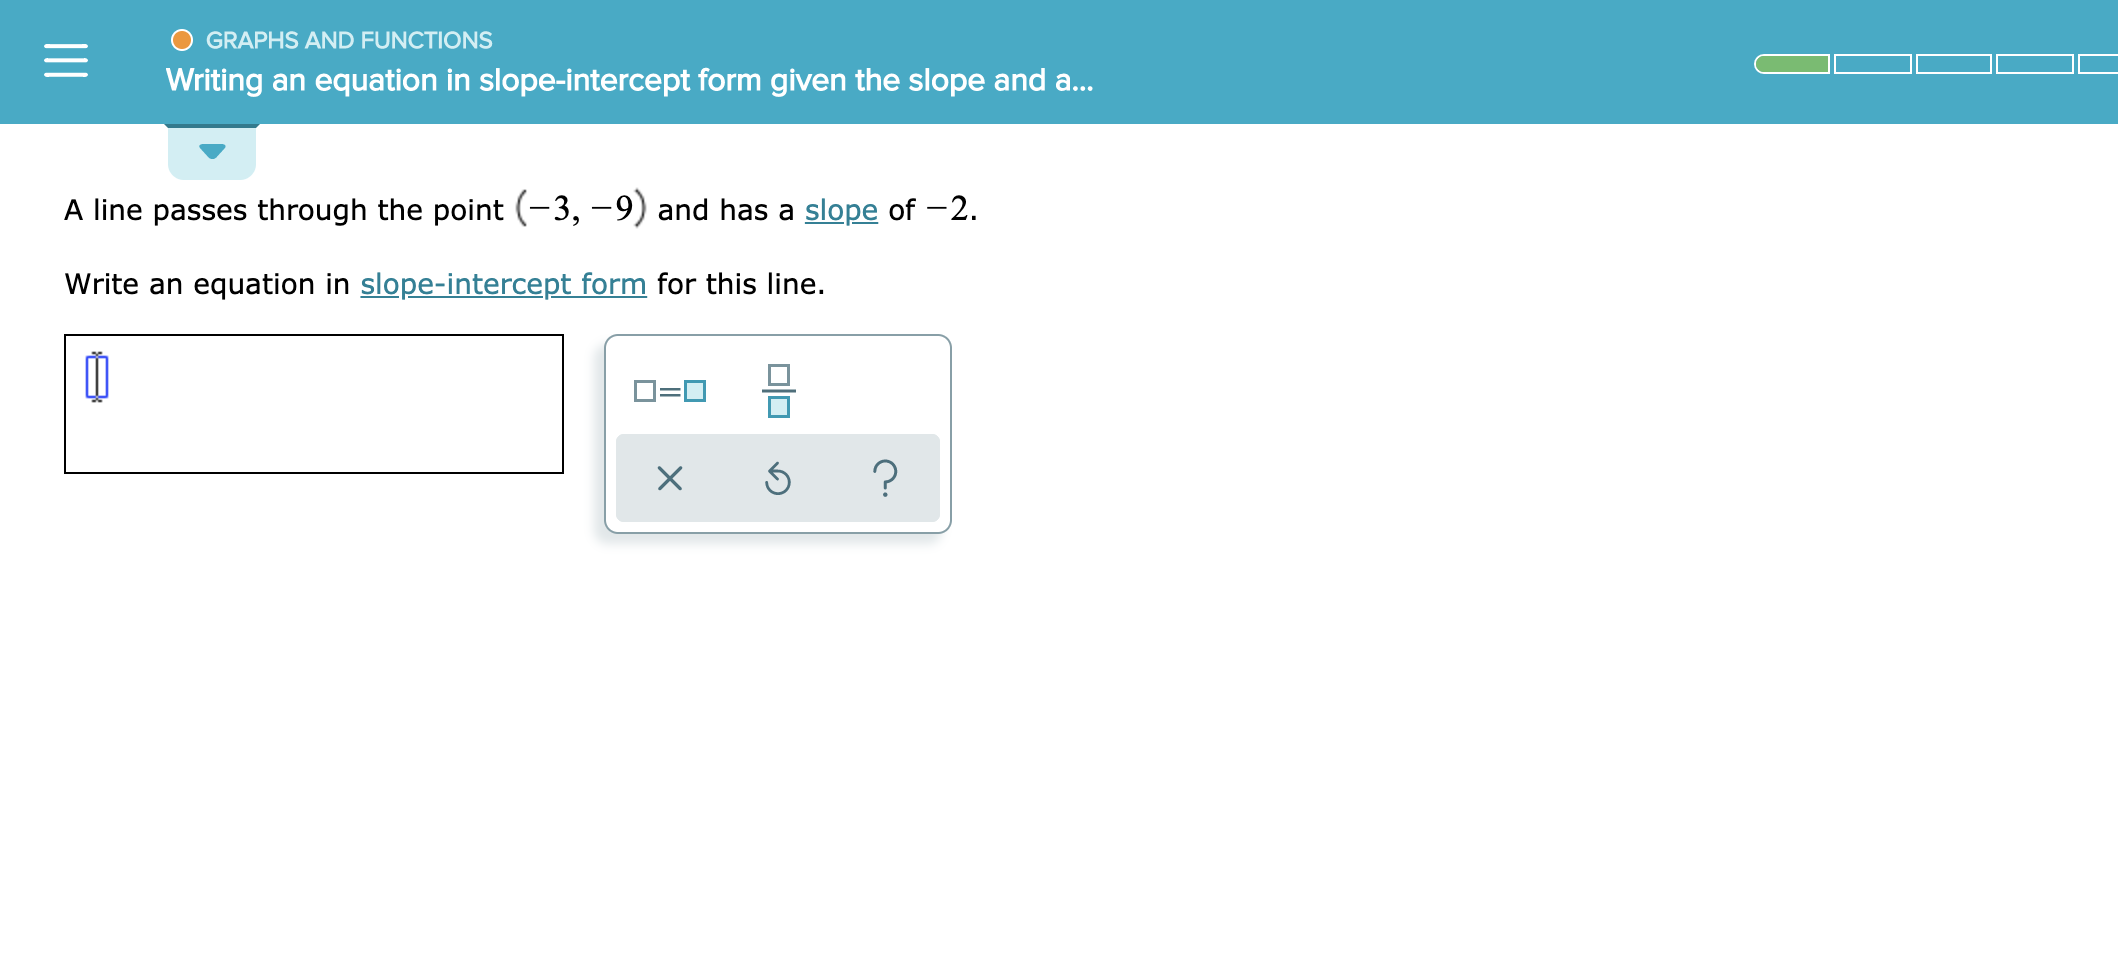 GRAPHS AND FUNCTIONS
Writing an equation in slope-intercept form given the slope and a..
A line passes through the point (-3, -9) and has a slope of -2.
Write an equation in slope-intercept form for this line.
?
X
